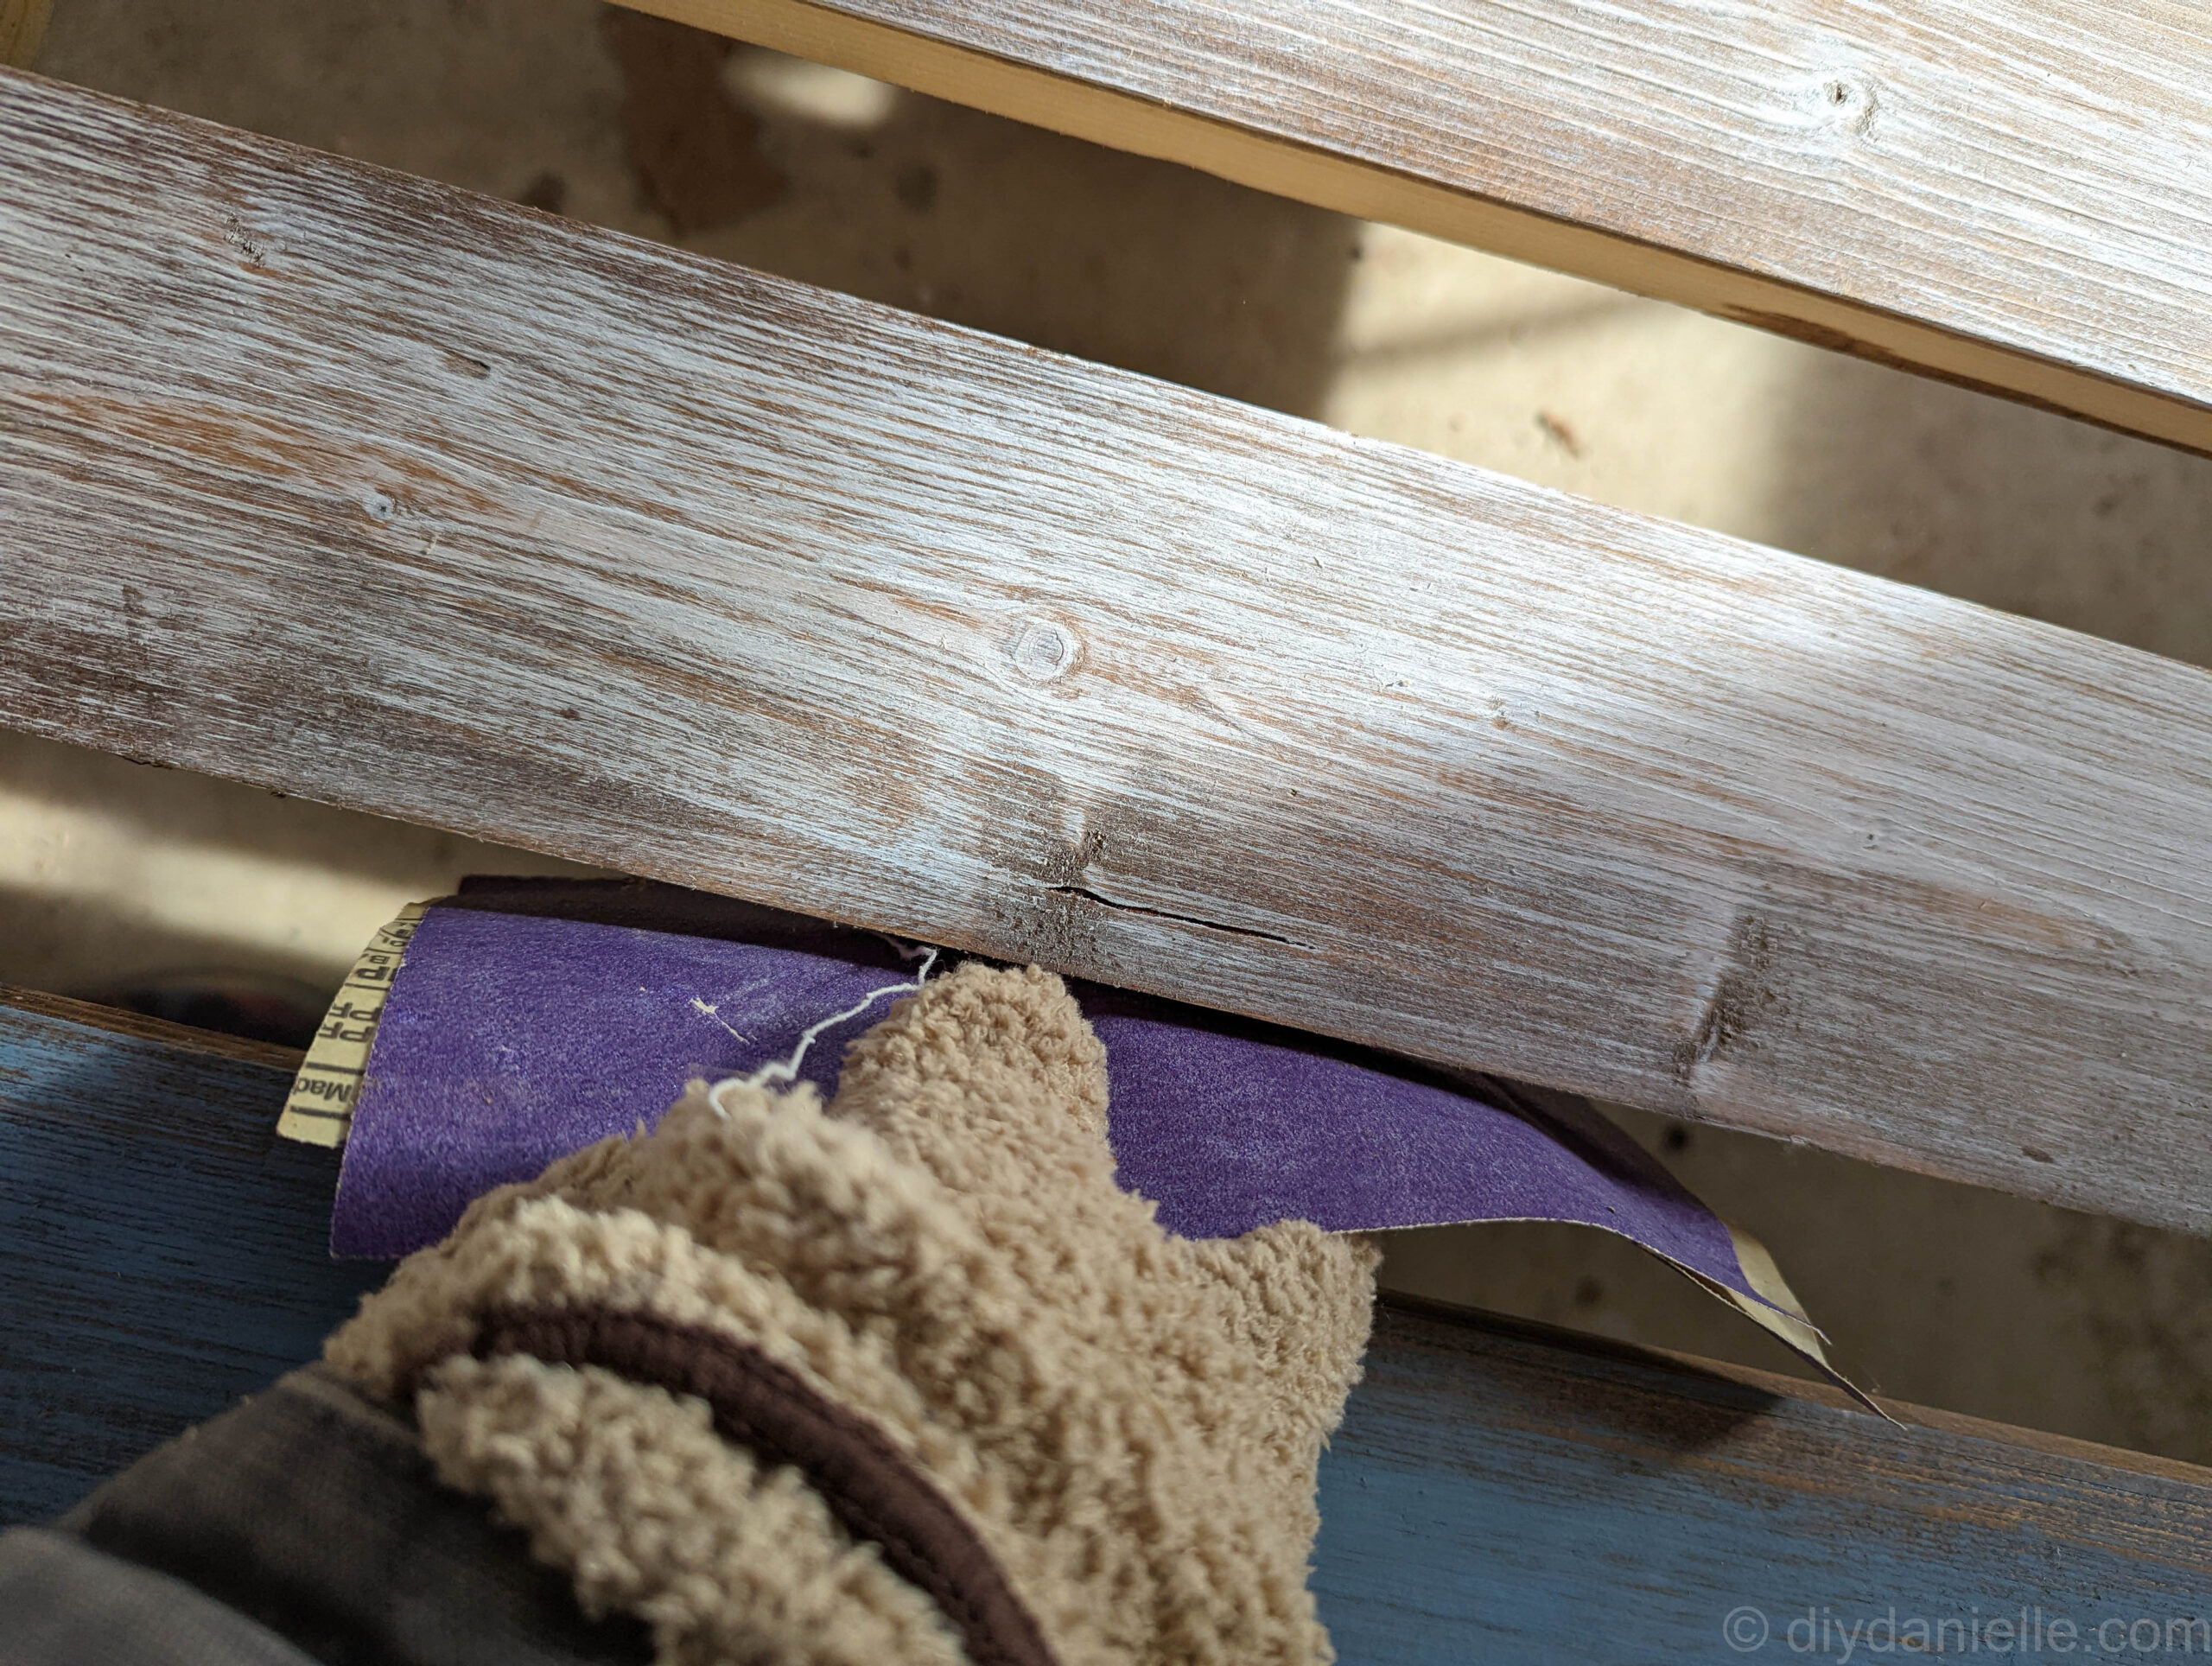 Sanding the wood for the bed.